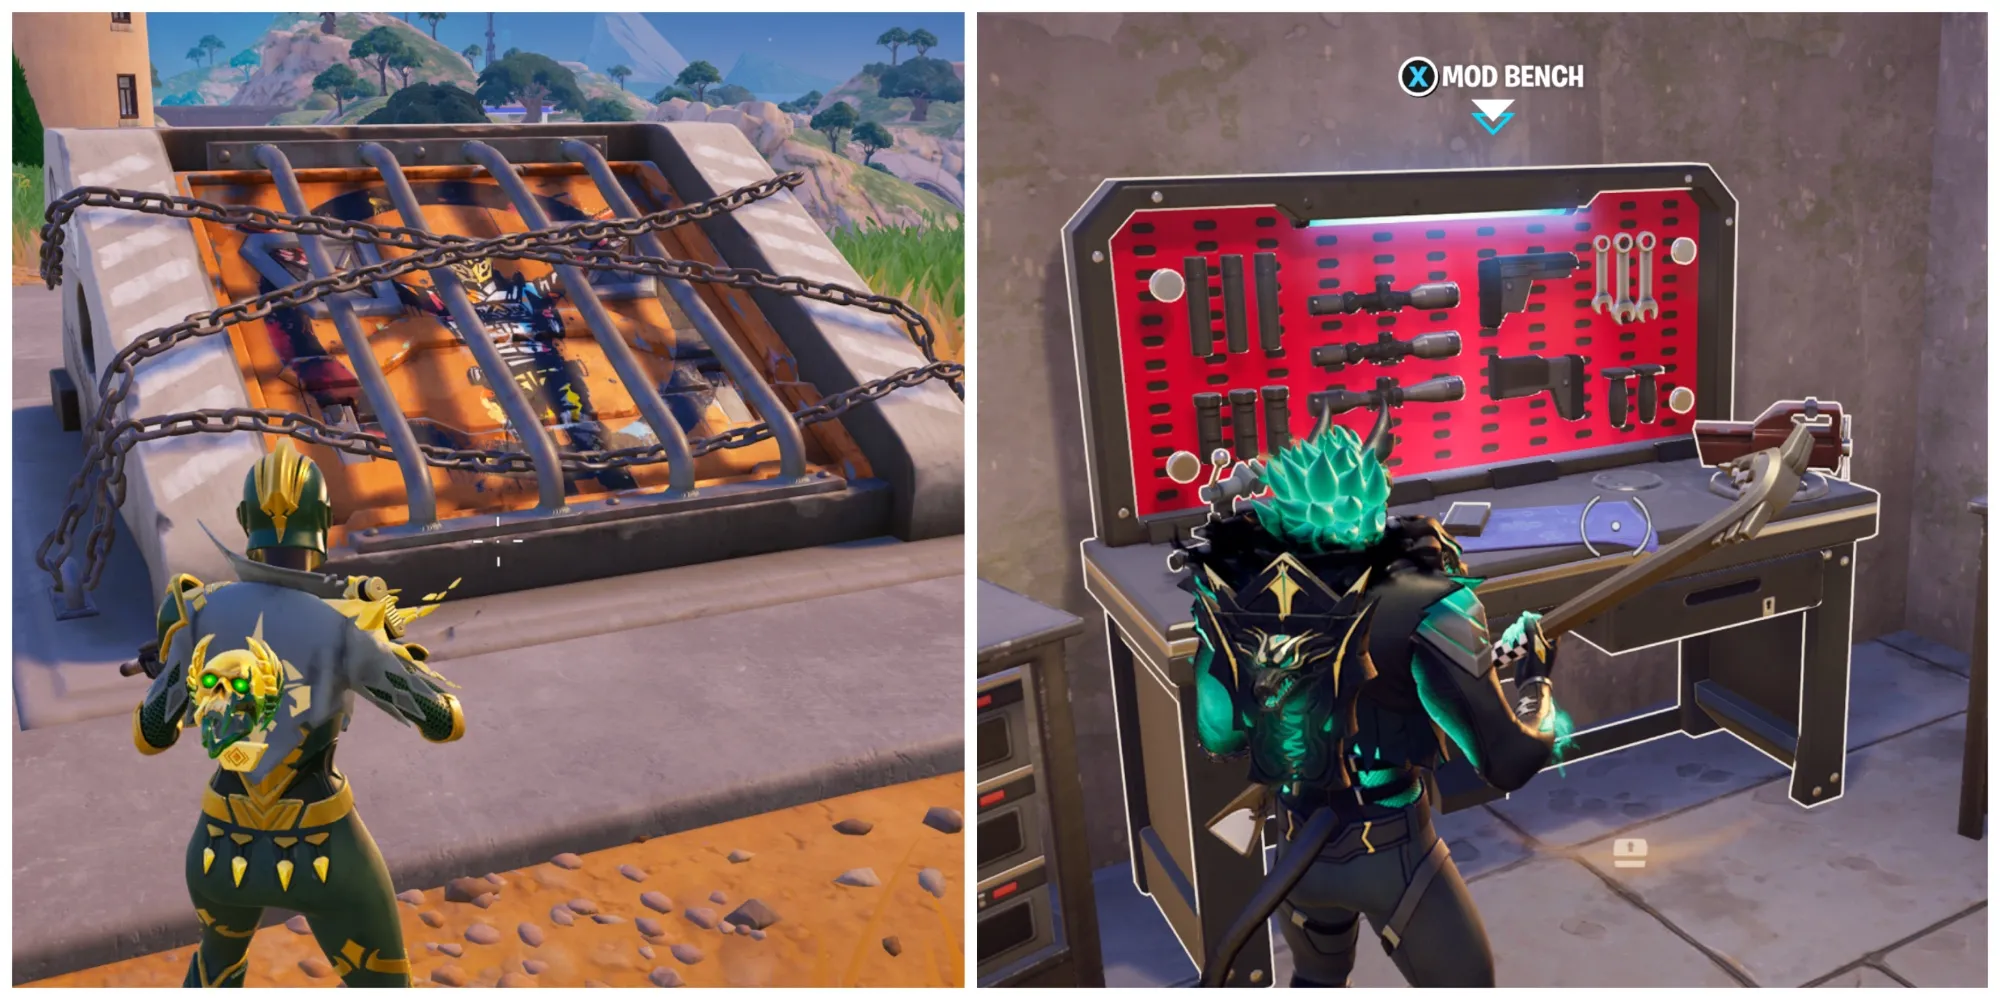 Locked weapon bunker. Accessing a mod bench in Fortnite